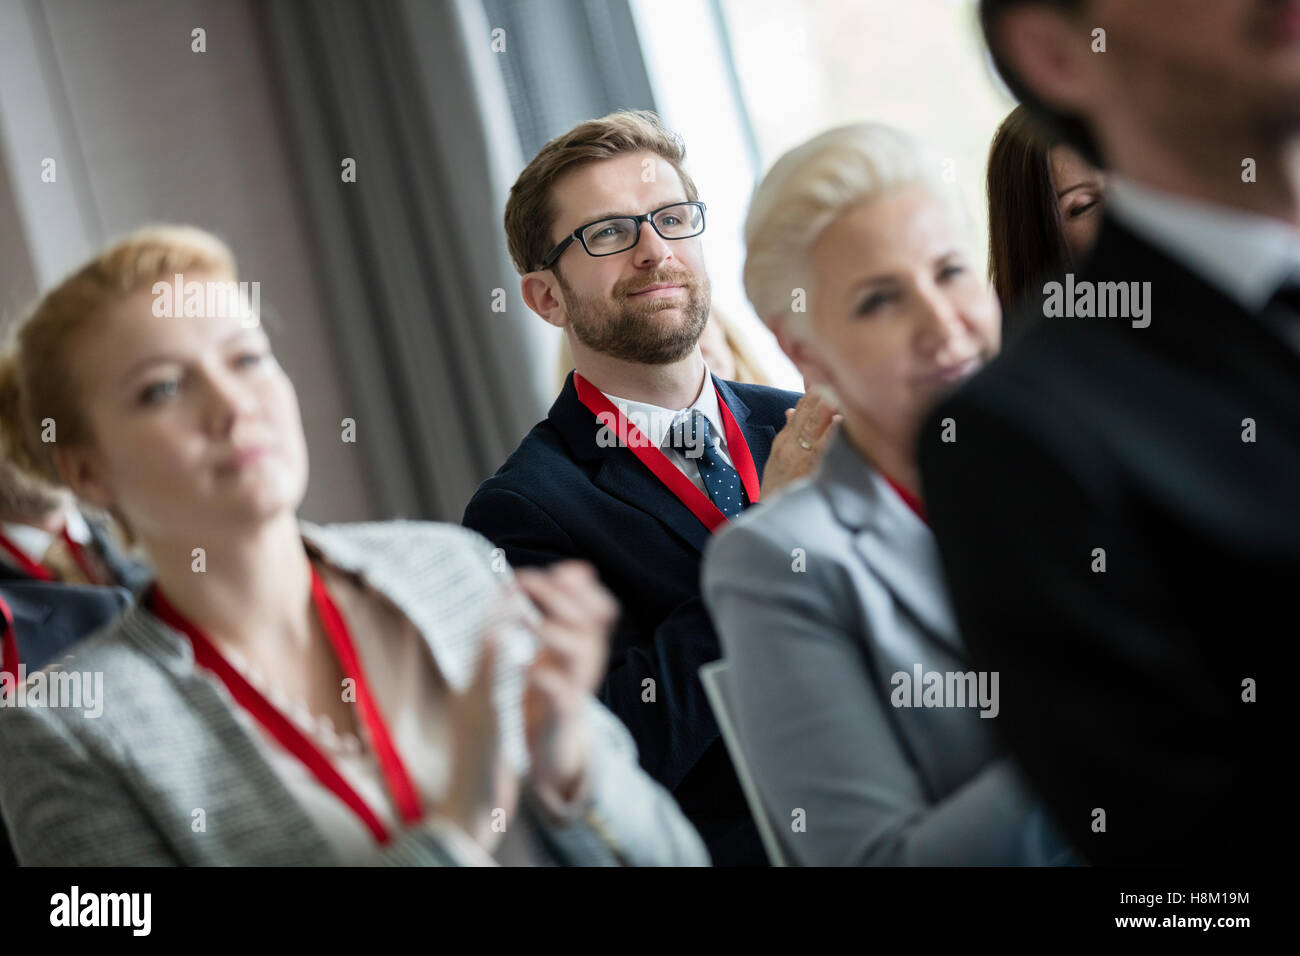 Business people applauding during seminar Stock Photo